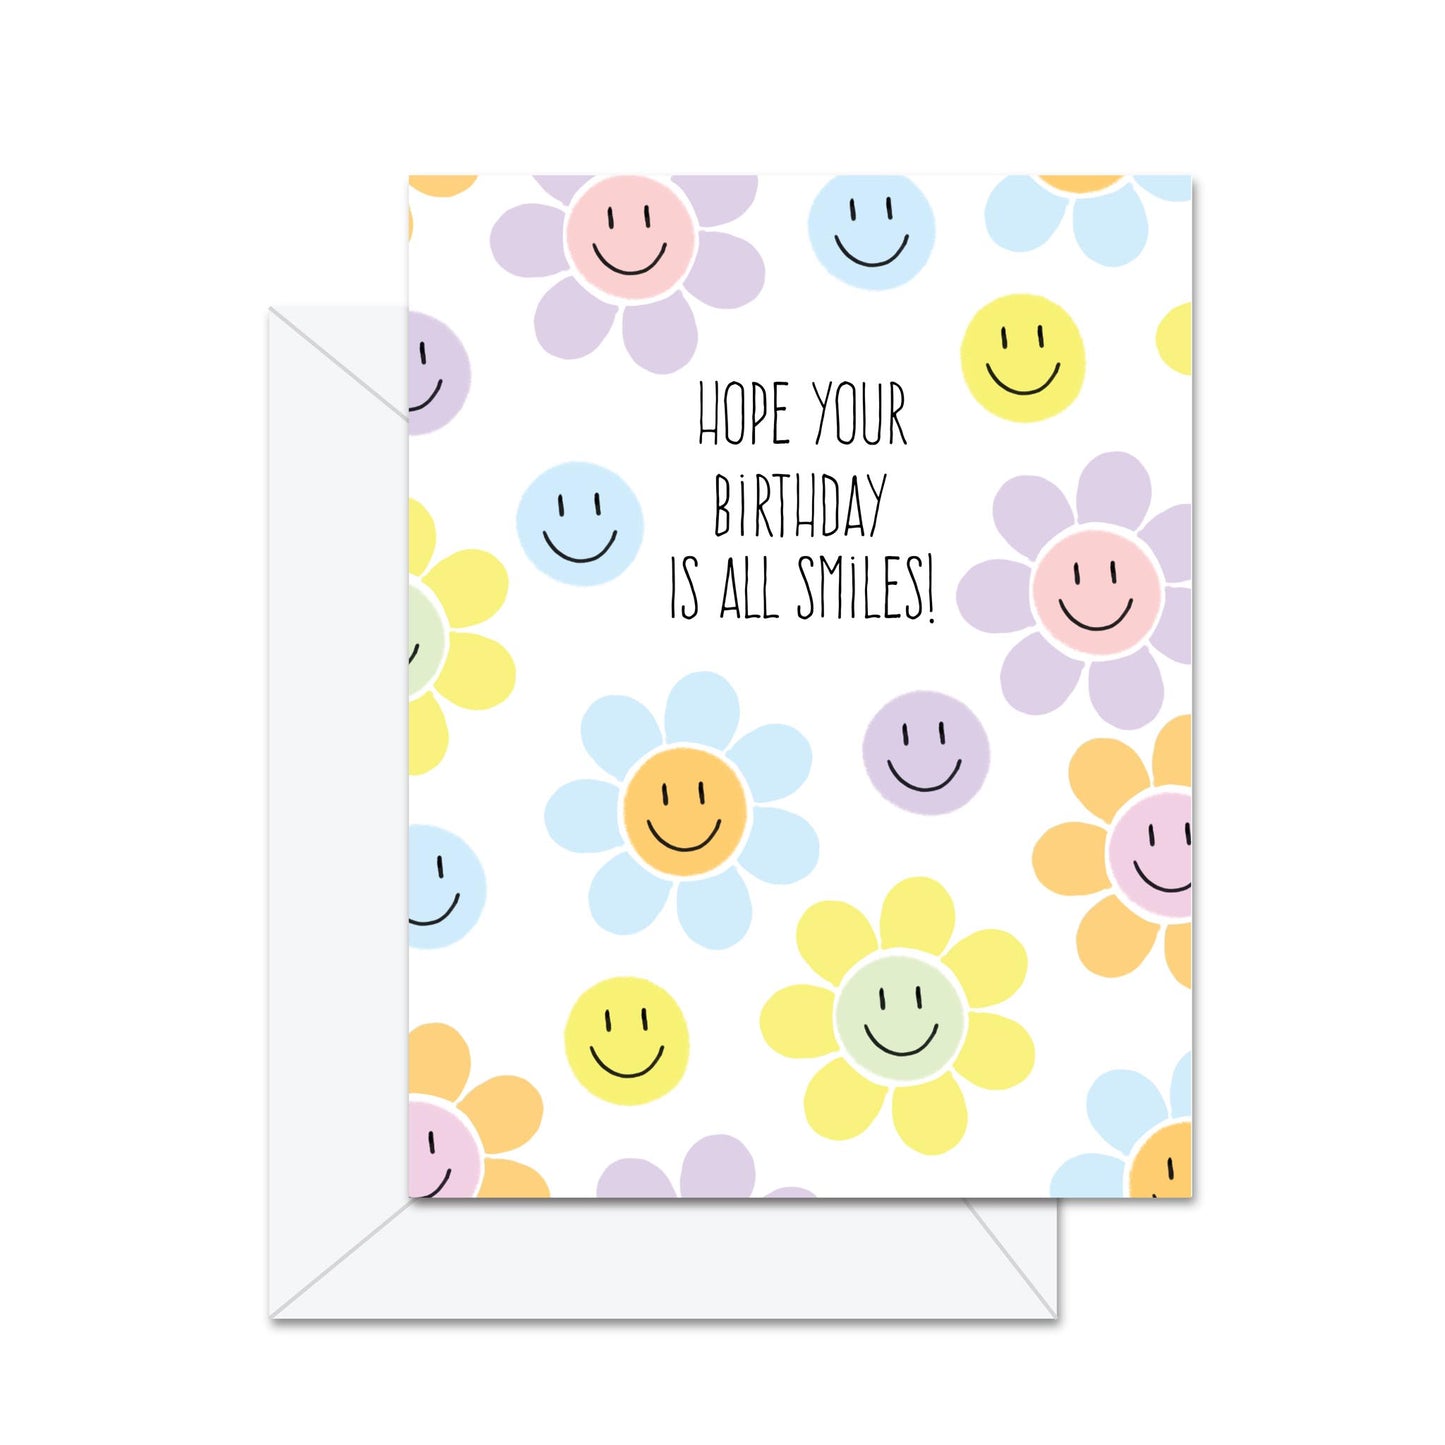 Hope Your Birthday Is All Smiles! - Greeting Card